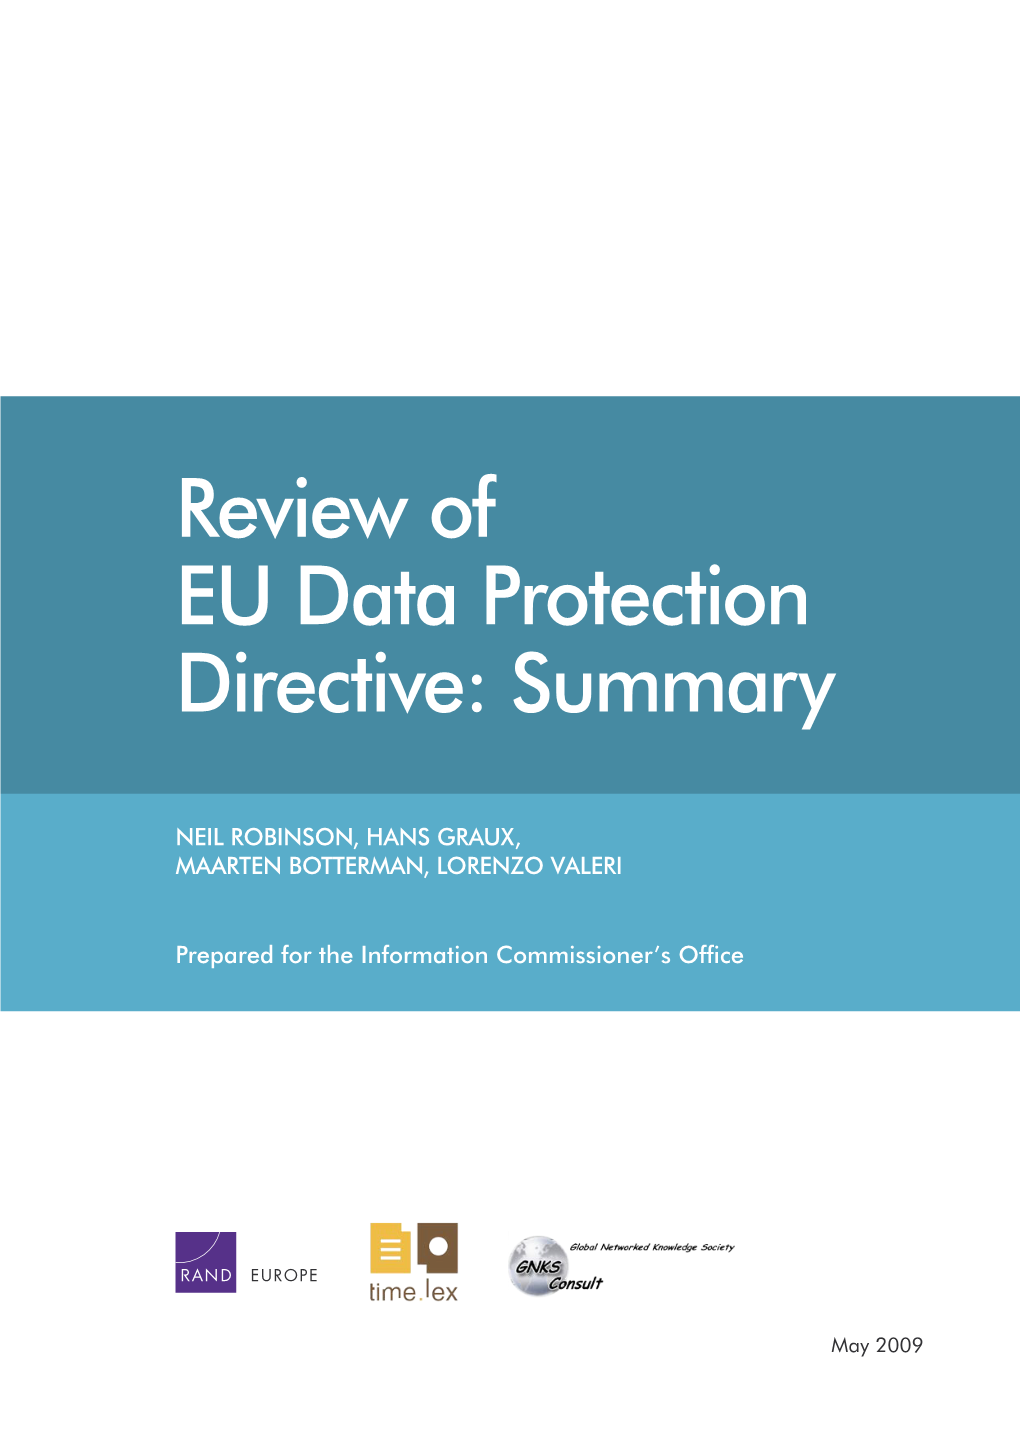 Review of EU Data Protection Directive: Summary